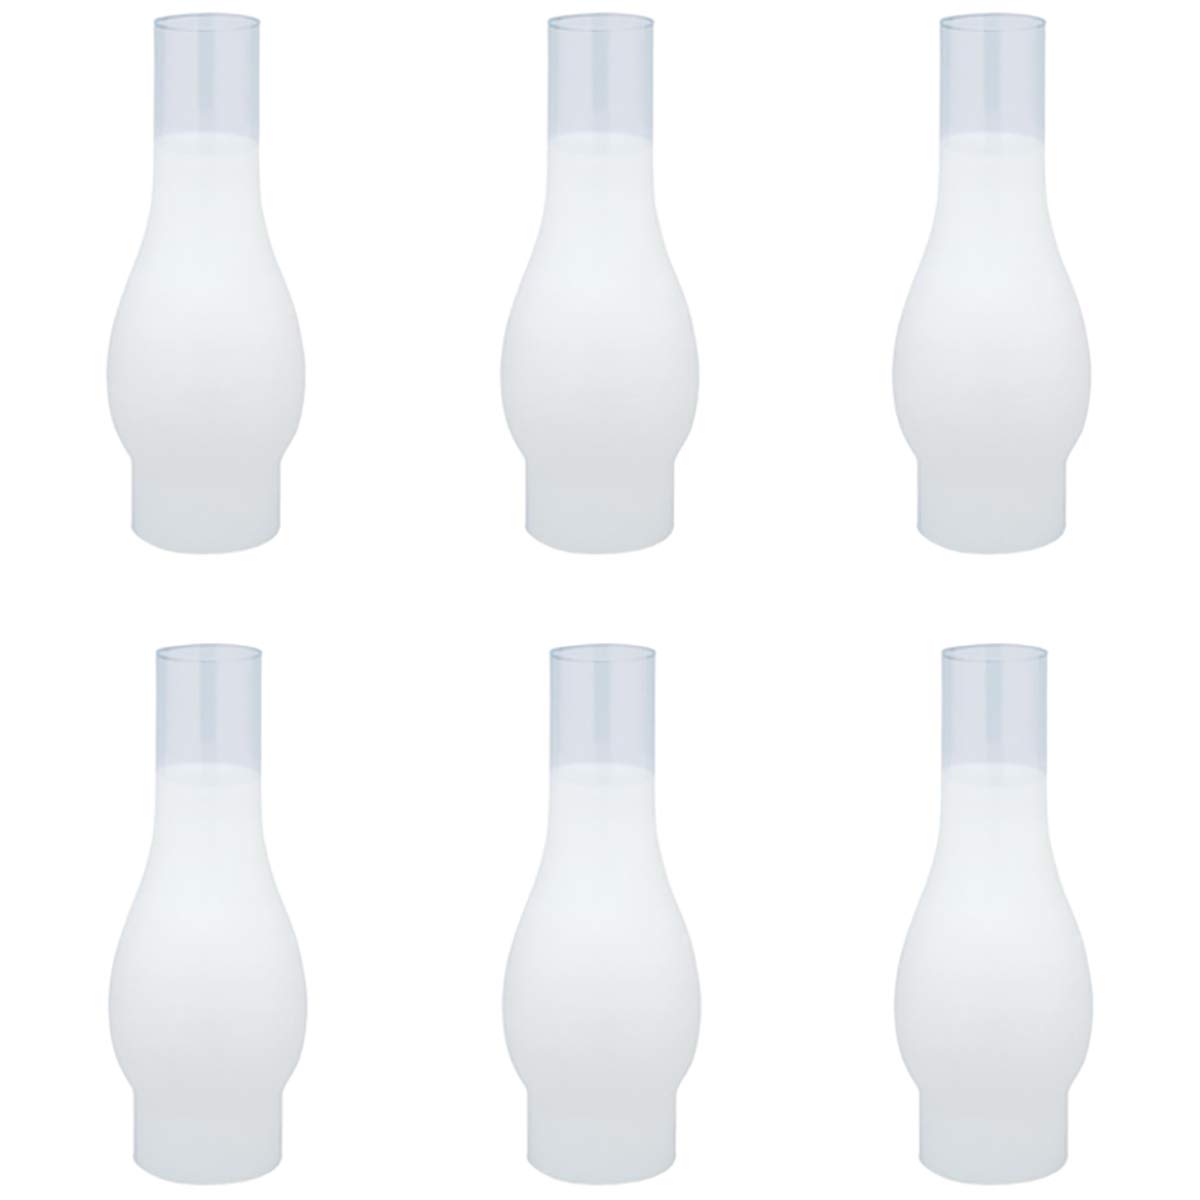 Freedy Lighting 3" x 10"-inch Frosted Glass Chimney Lamp Shade for oil lamps and electric lamps